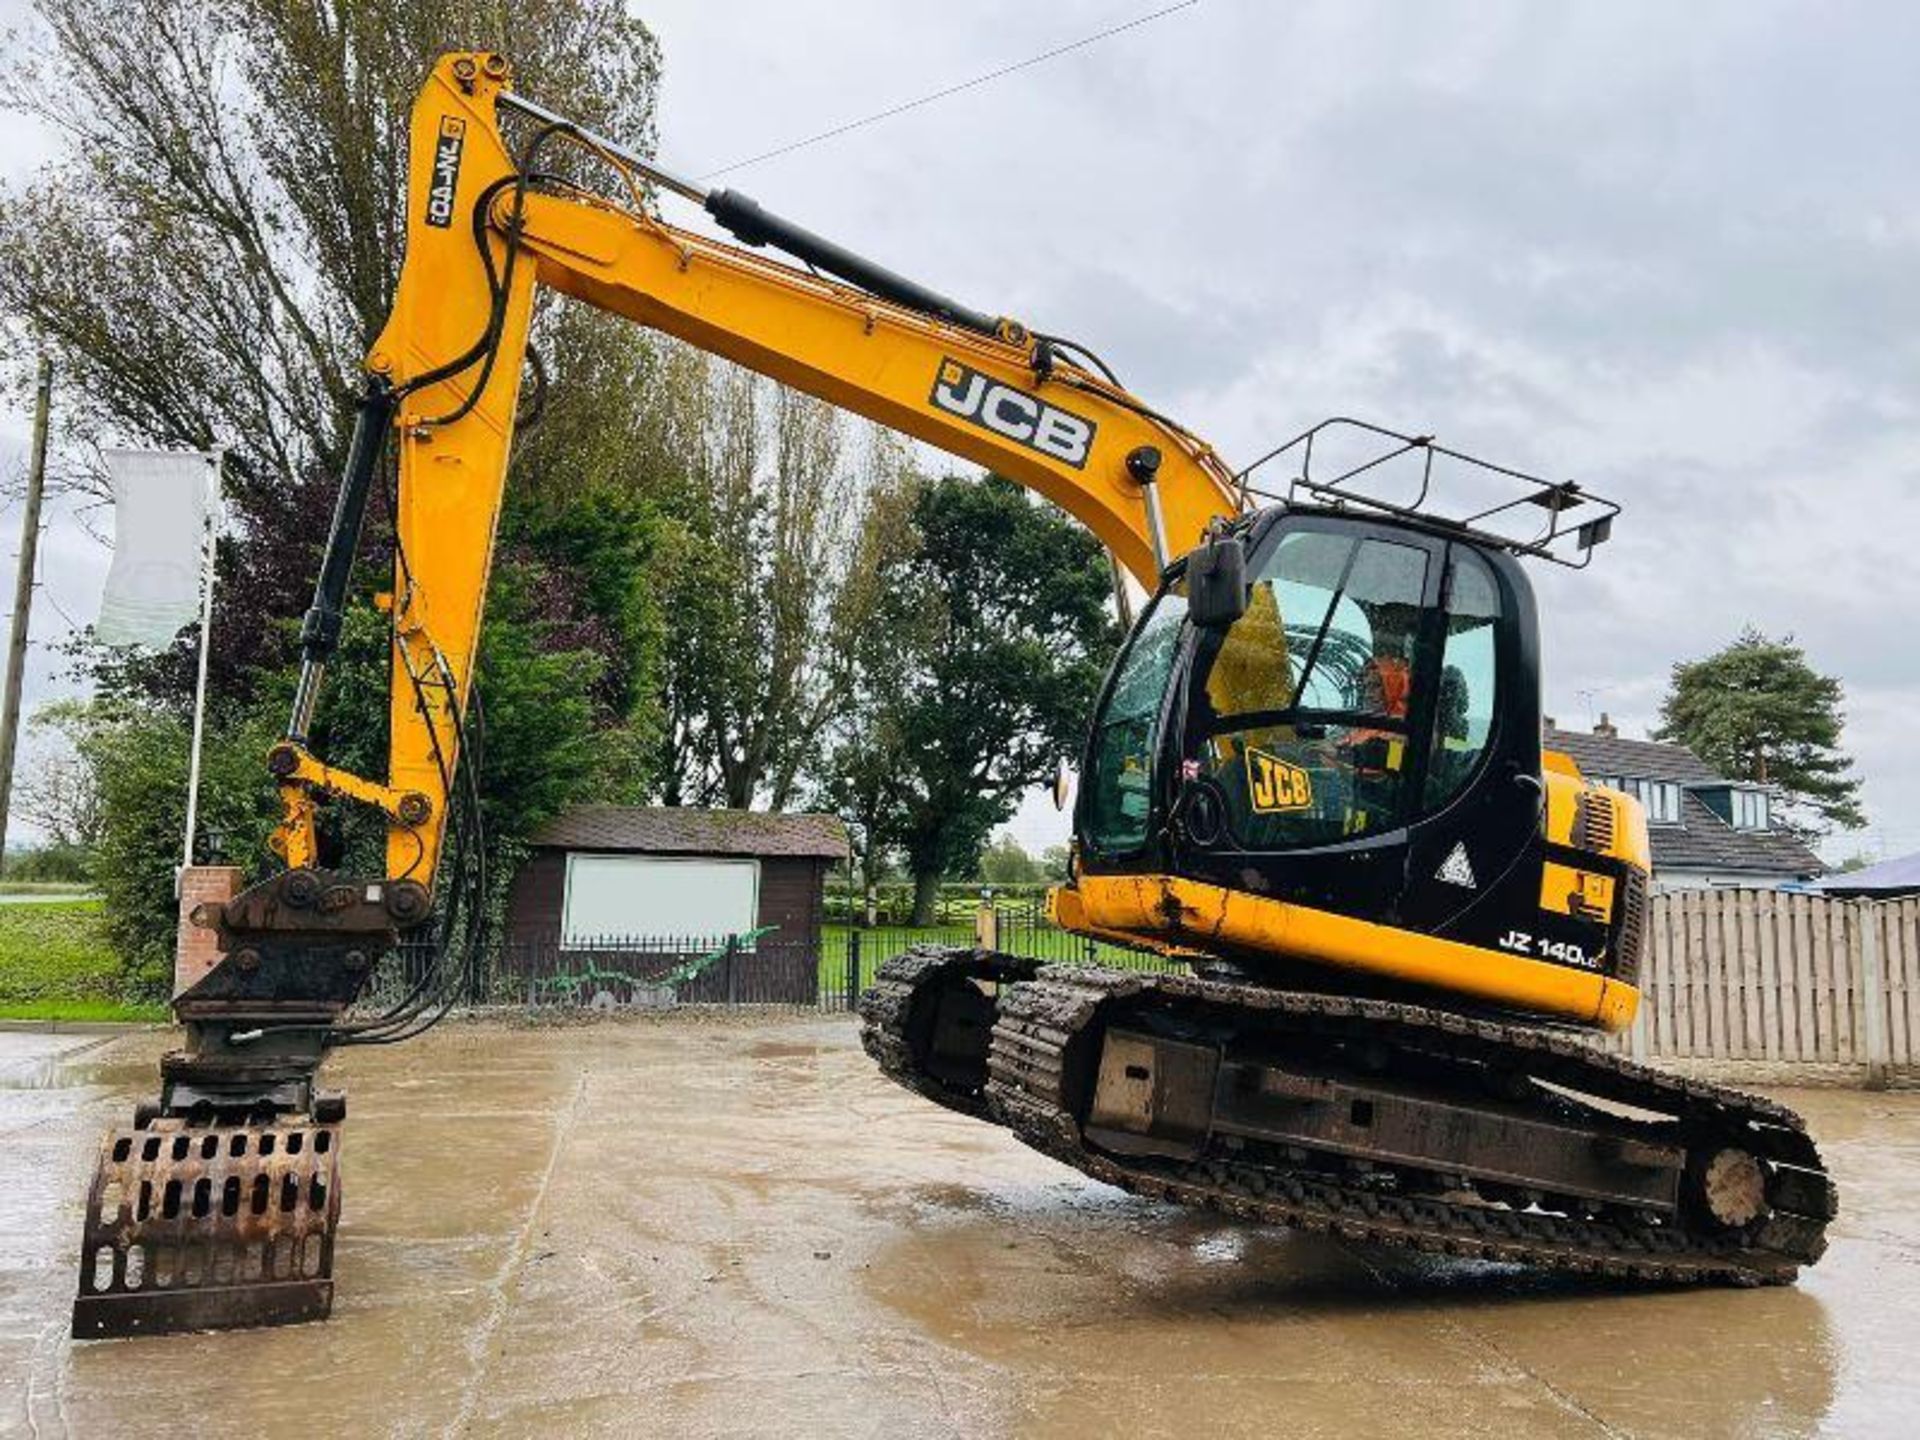 JCB JZ140 TRACKED EXCAVATOR *ZERO SWING* C/W QUICK HITCH & ROTATING SELECTOR GRAB. - Image 4 of 15